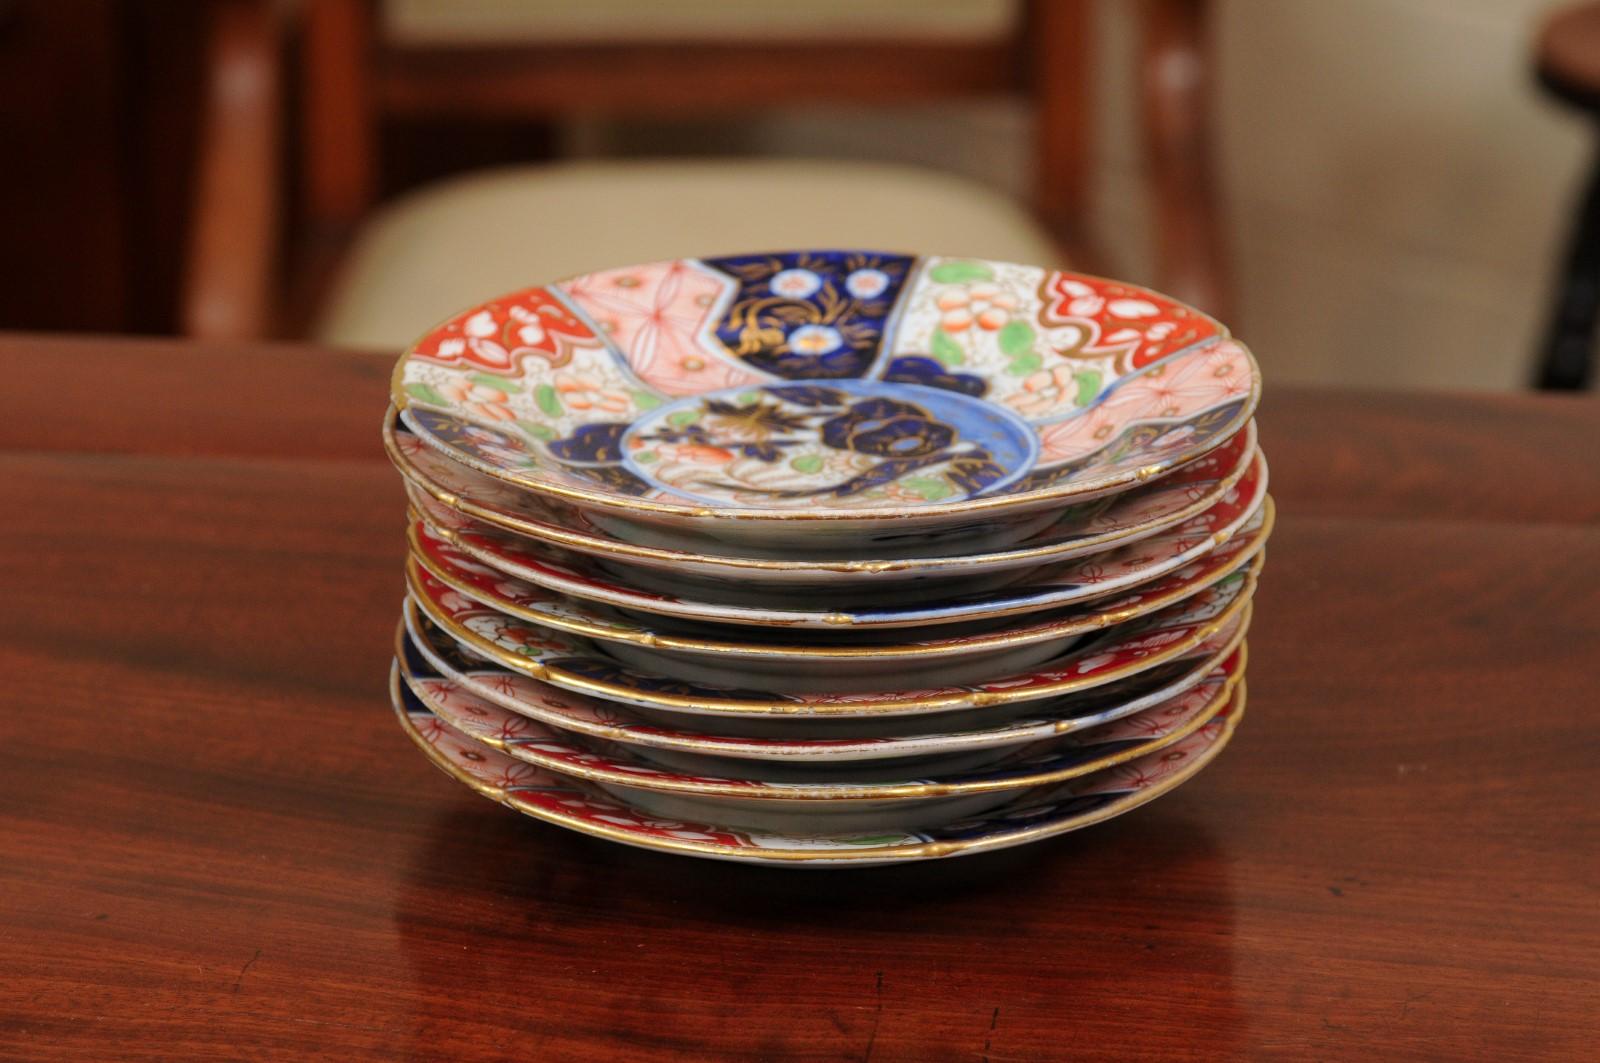 Set of Eight '8' Porcelain Plates in “Money Tree” Pattern, England, circa 1820 For Sale 5